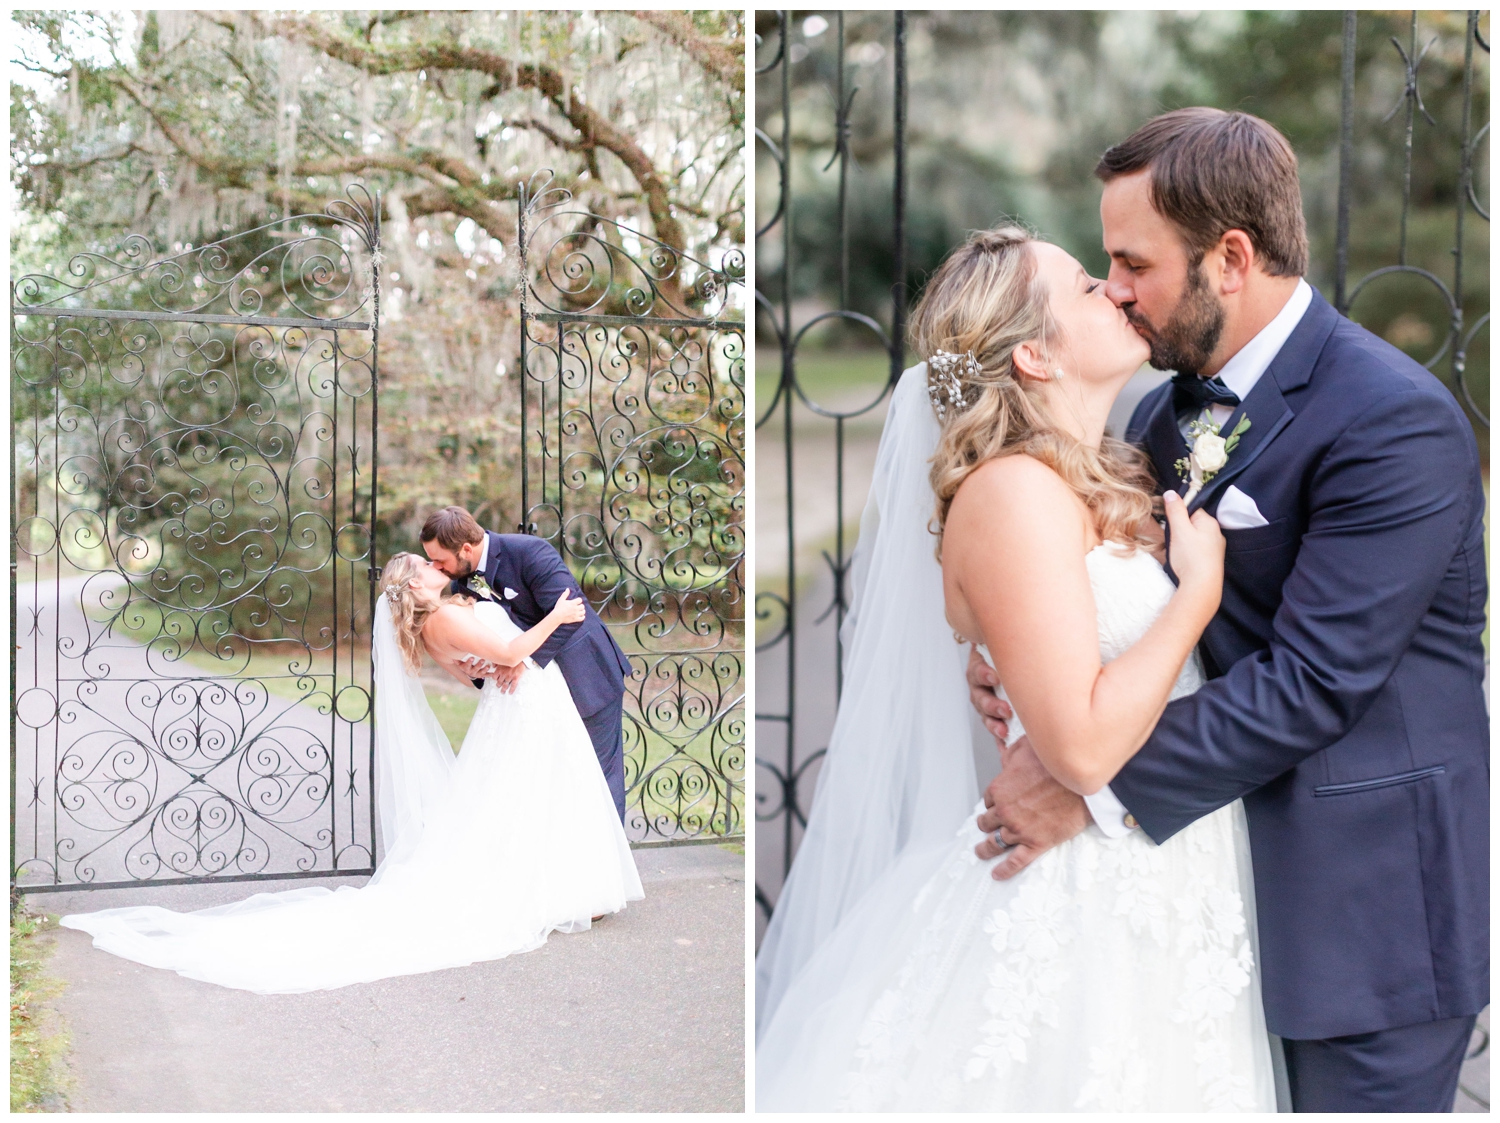 newlywed portraits by the gate at Legare Waring House wedding venue